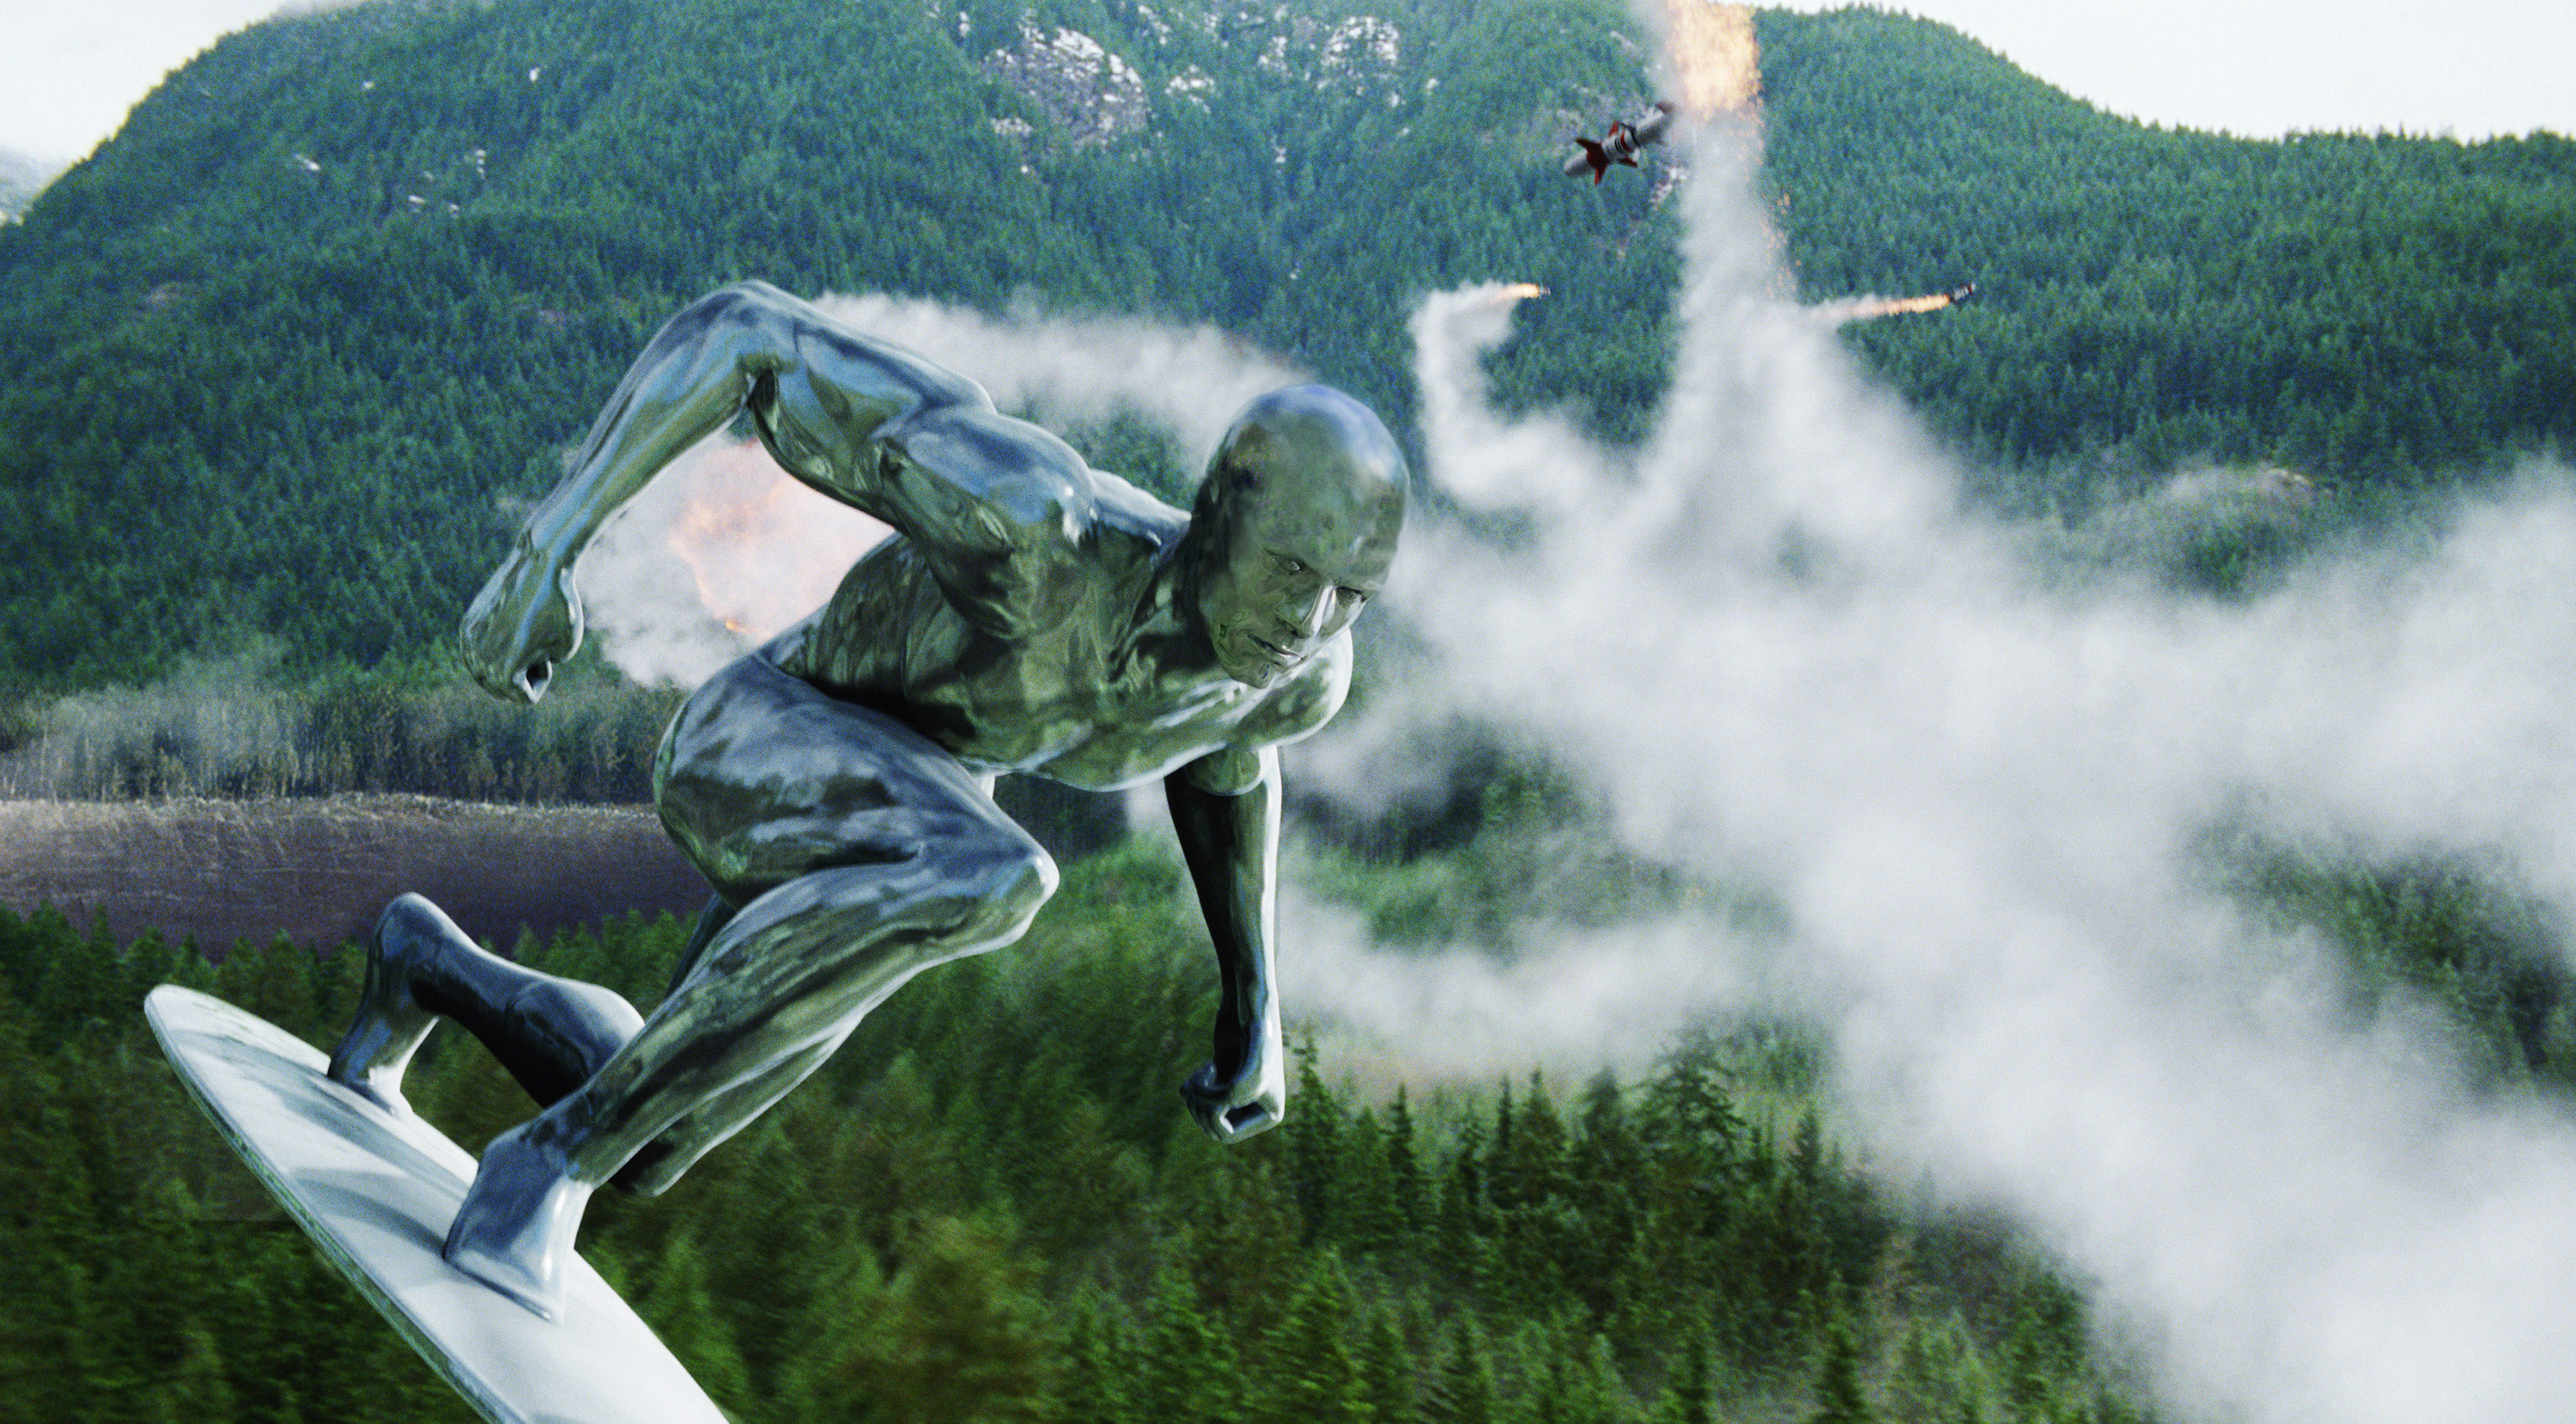 A skinny, silver extraterrestrial flies in the path of several missiles above a vast forest